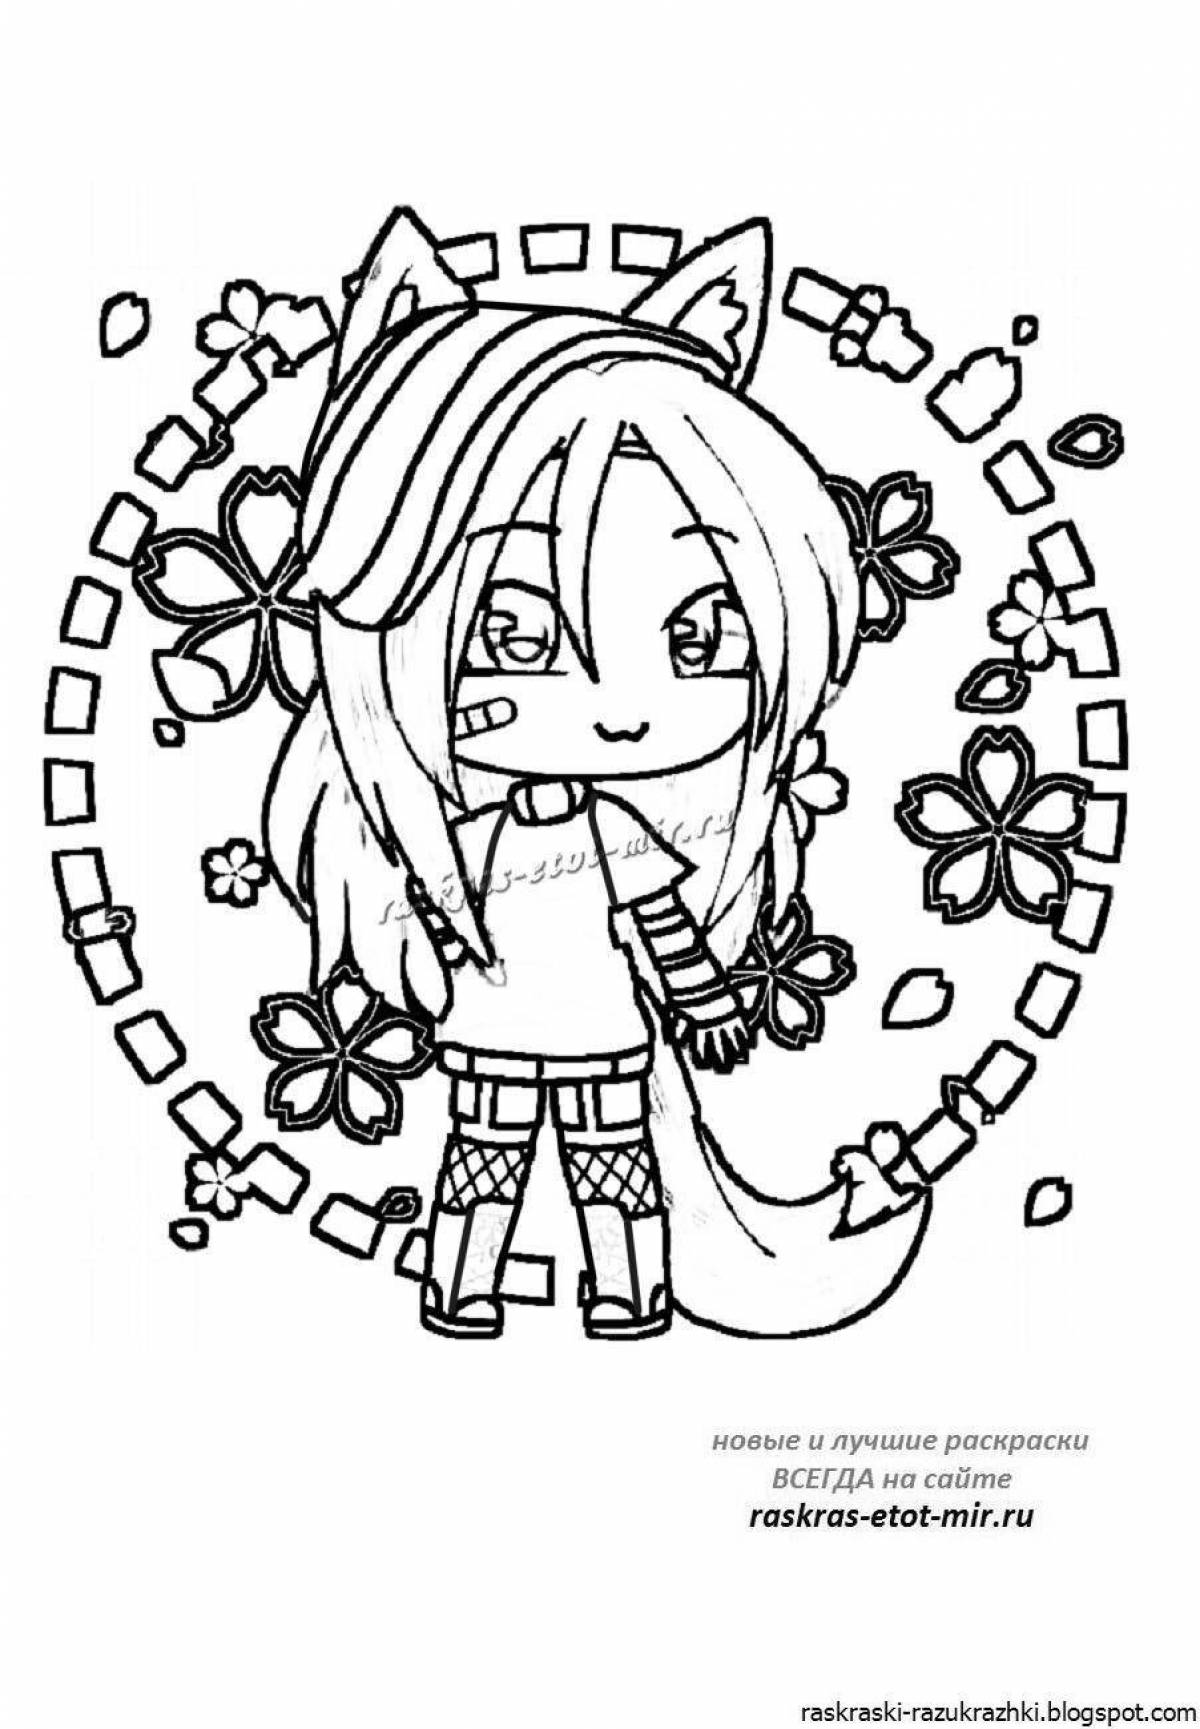 Exquisite gacha life coloring book for girls